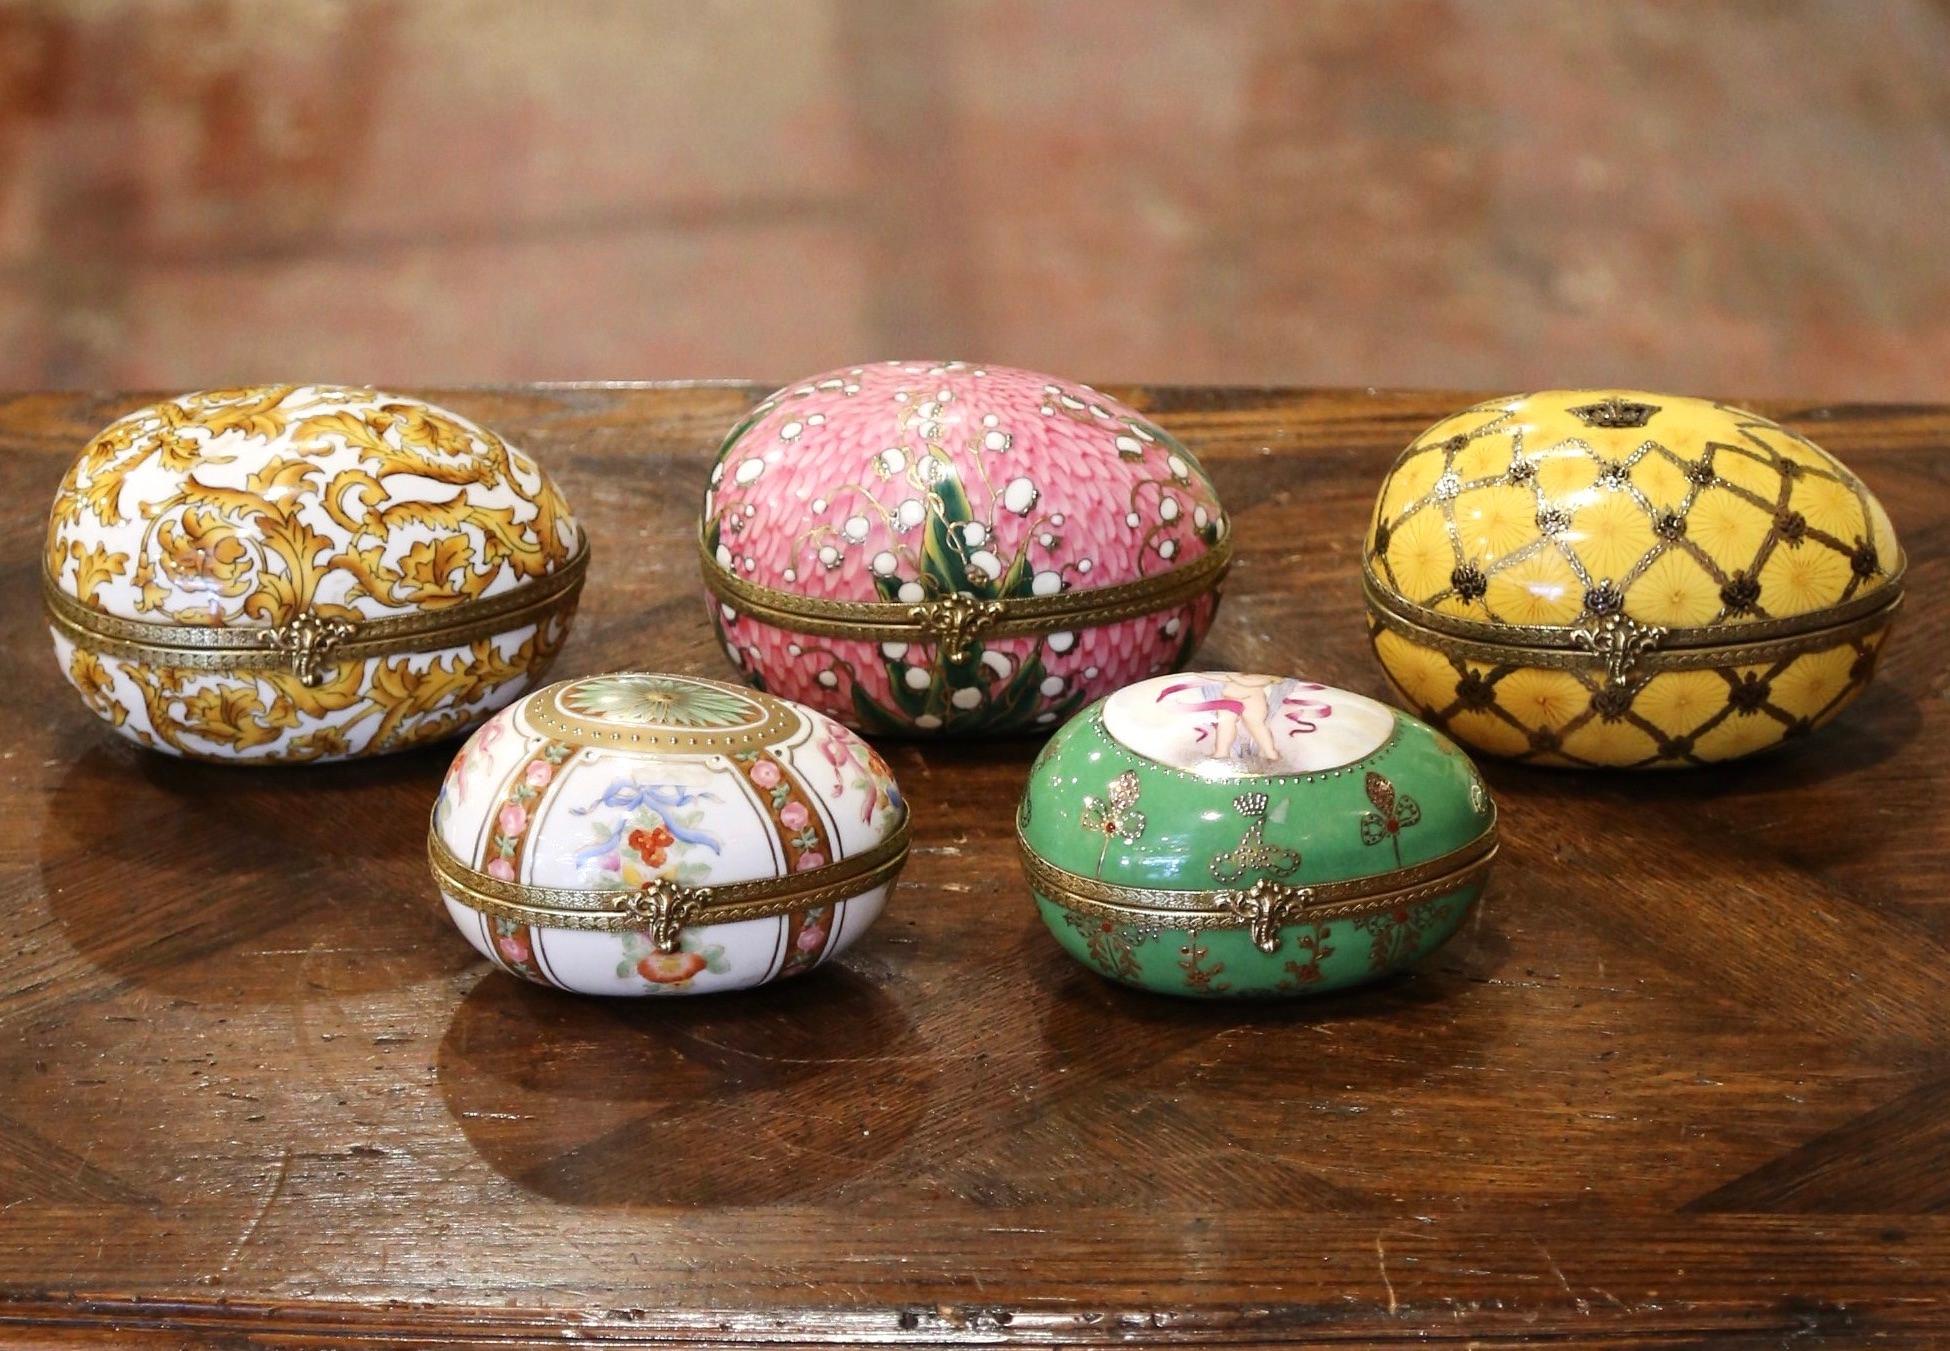 Decorate a shelf with this elegant set of antique porcelain egg boxes. Crafted in Limoges France circa 1880, each colorful porcelain piece is dressed with a decorative brass rim with back hinge and locking mechanism; each egg features hand painted